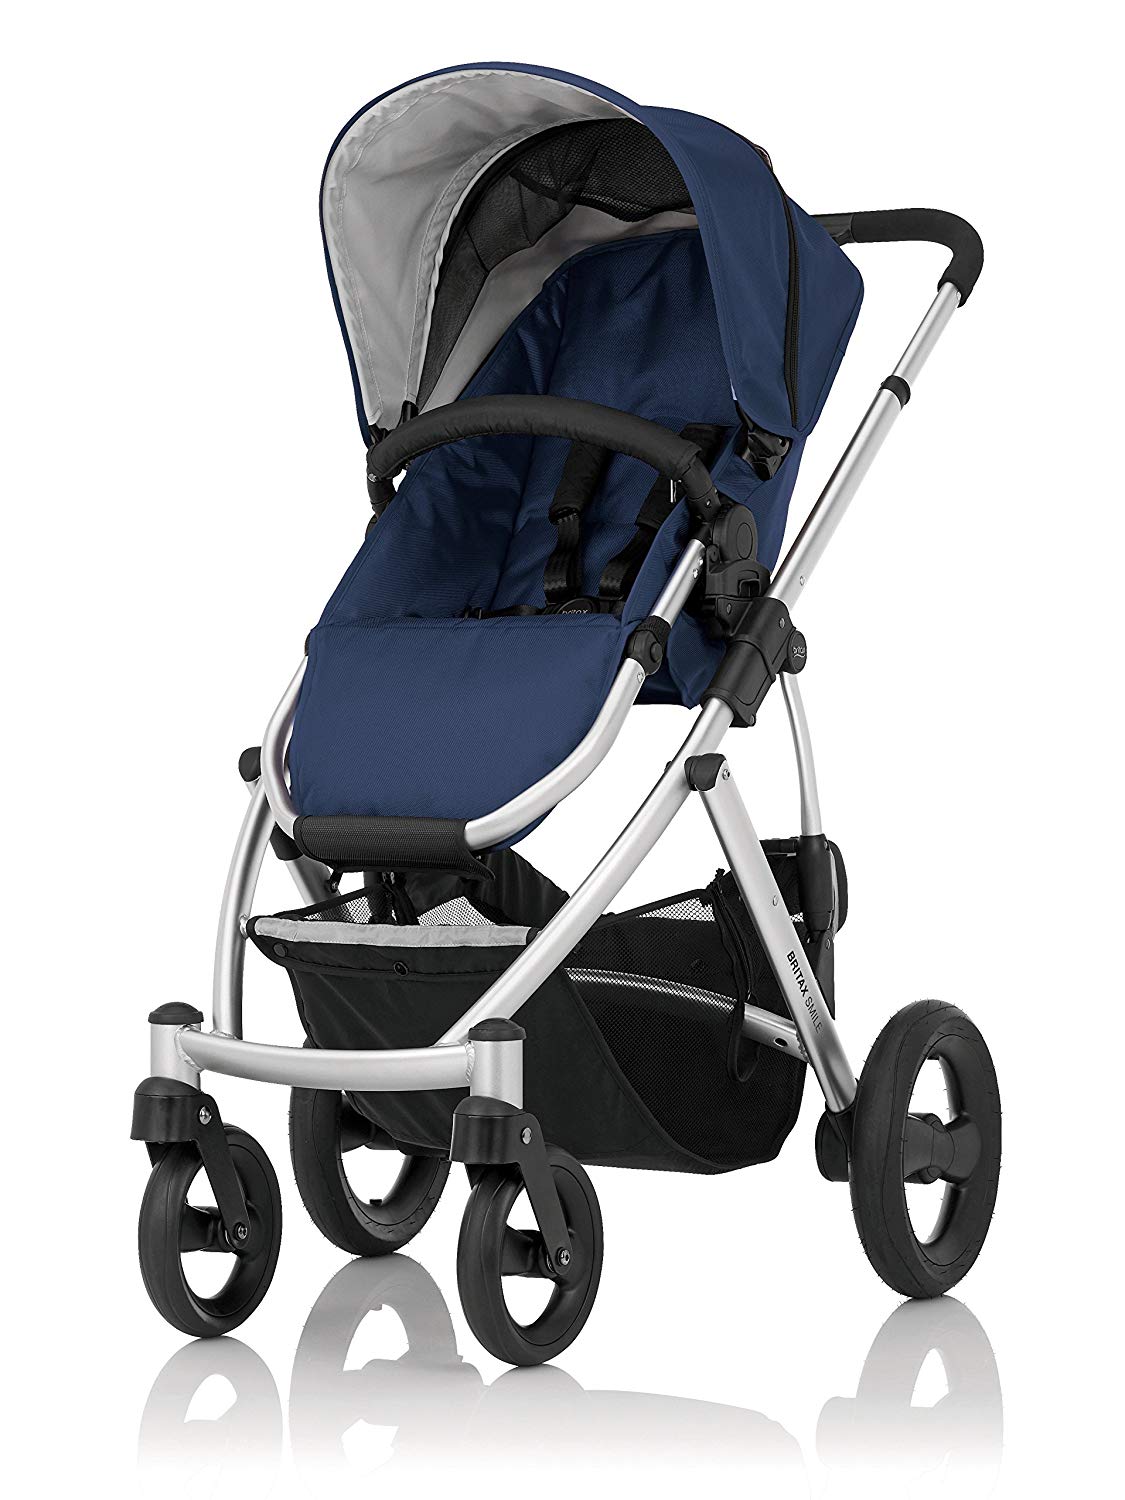 Britax 2000014508 Smile Collection 2015, Navy/Silver Chassis